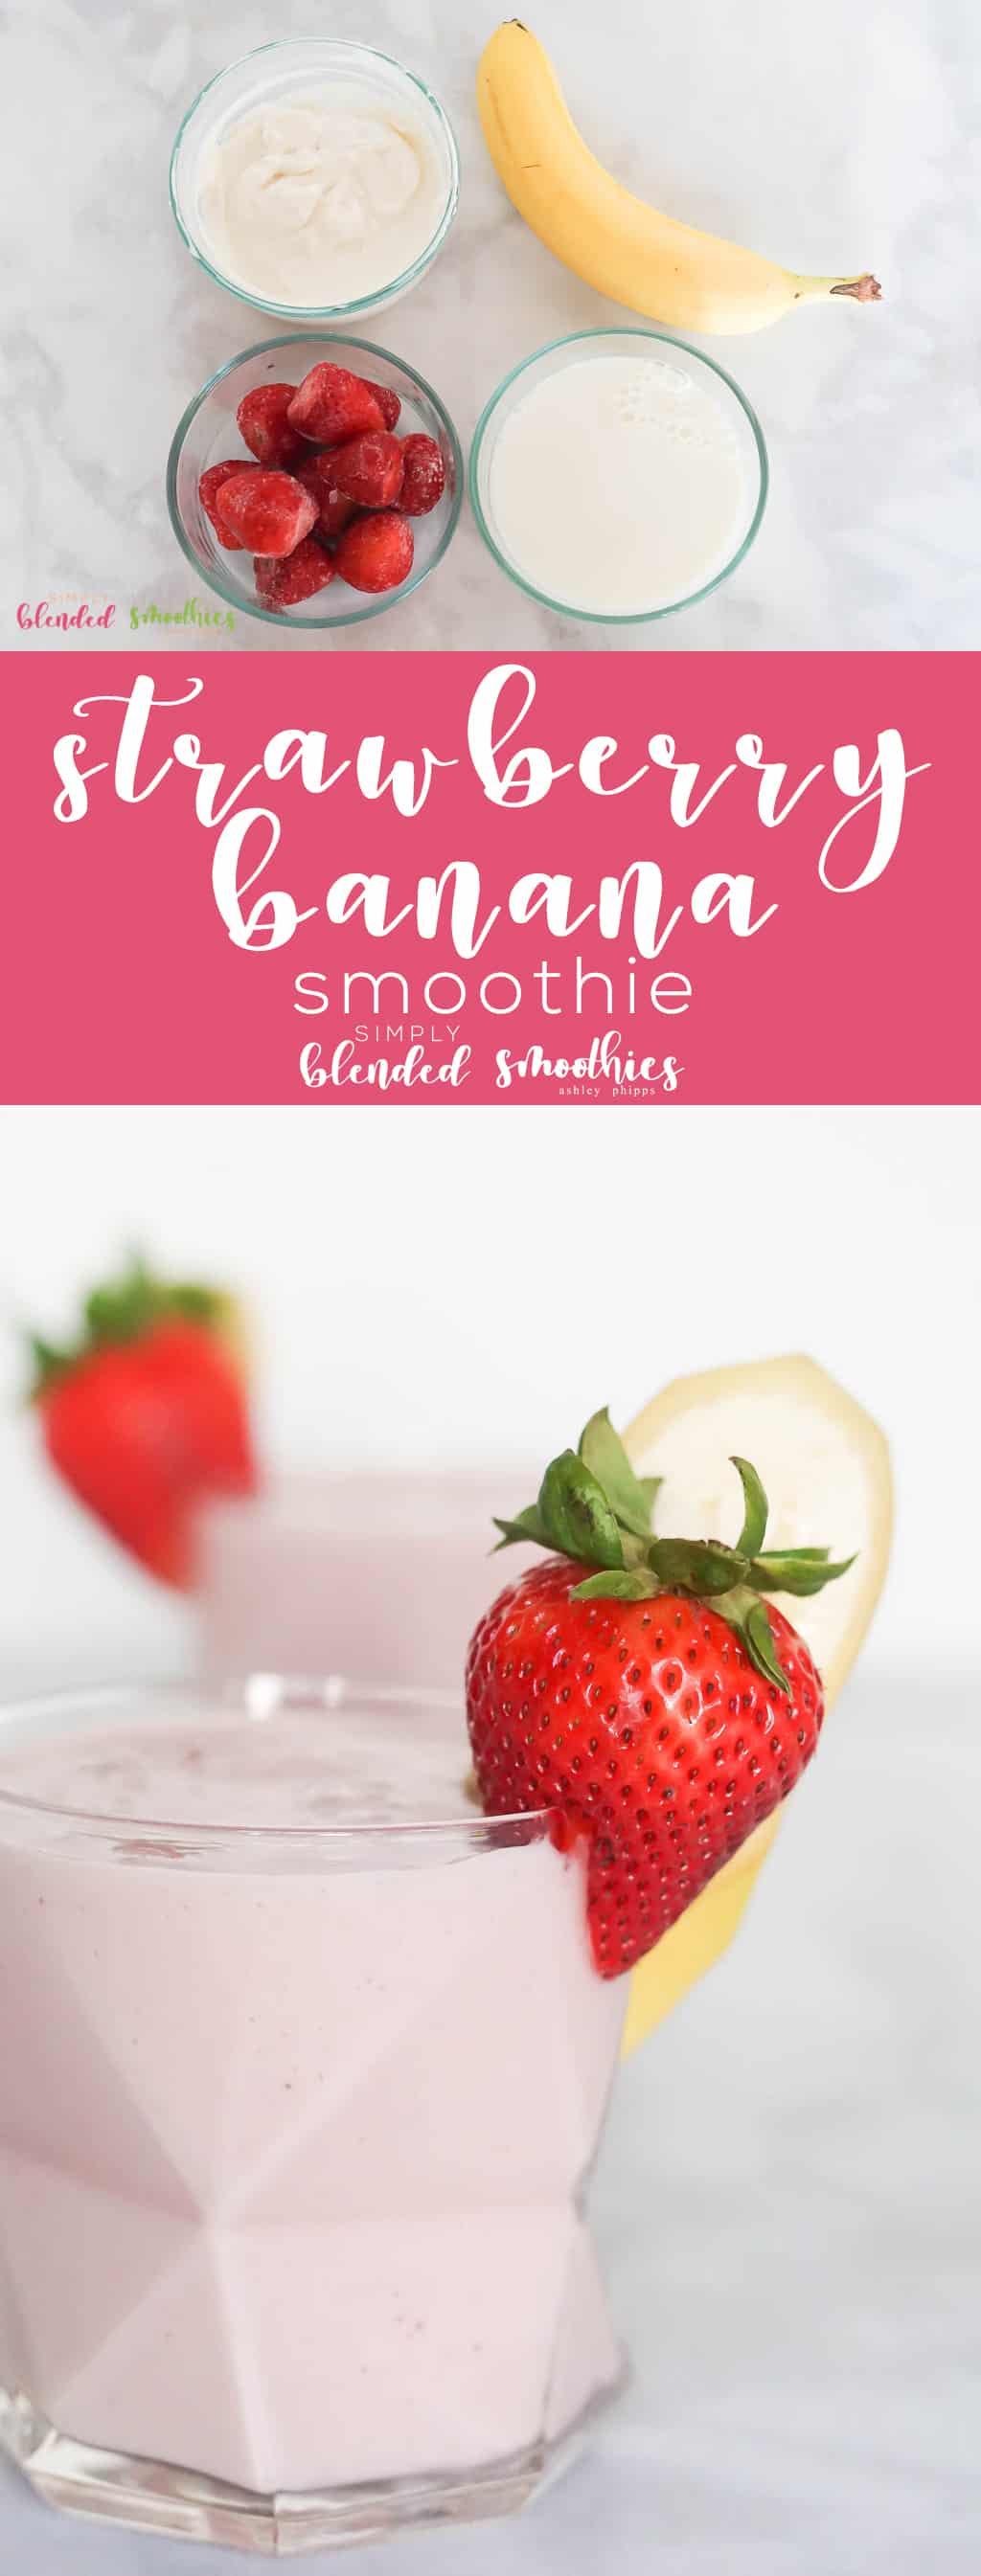 Strawberry Banana Smoothie - This Healthy Smoothie Recipe Is Easy To Make And So Delicious